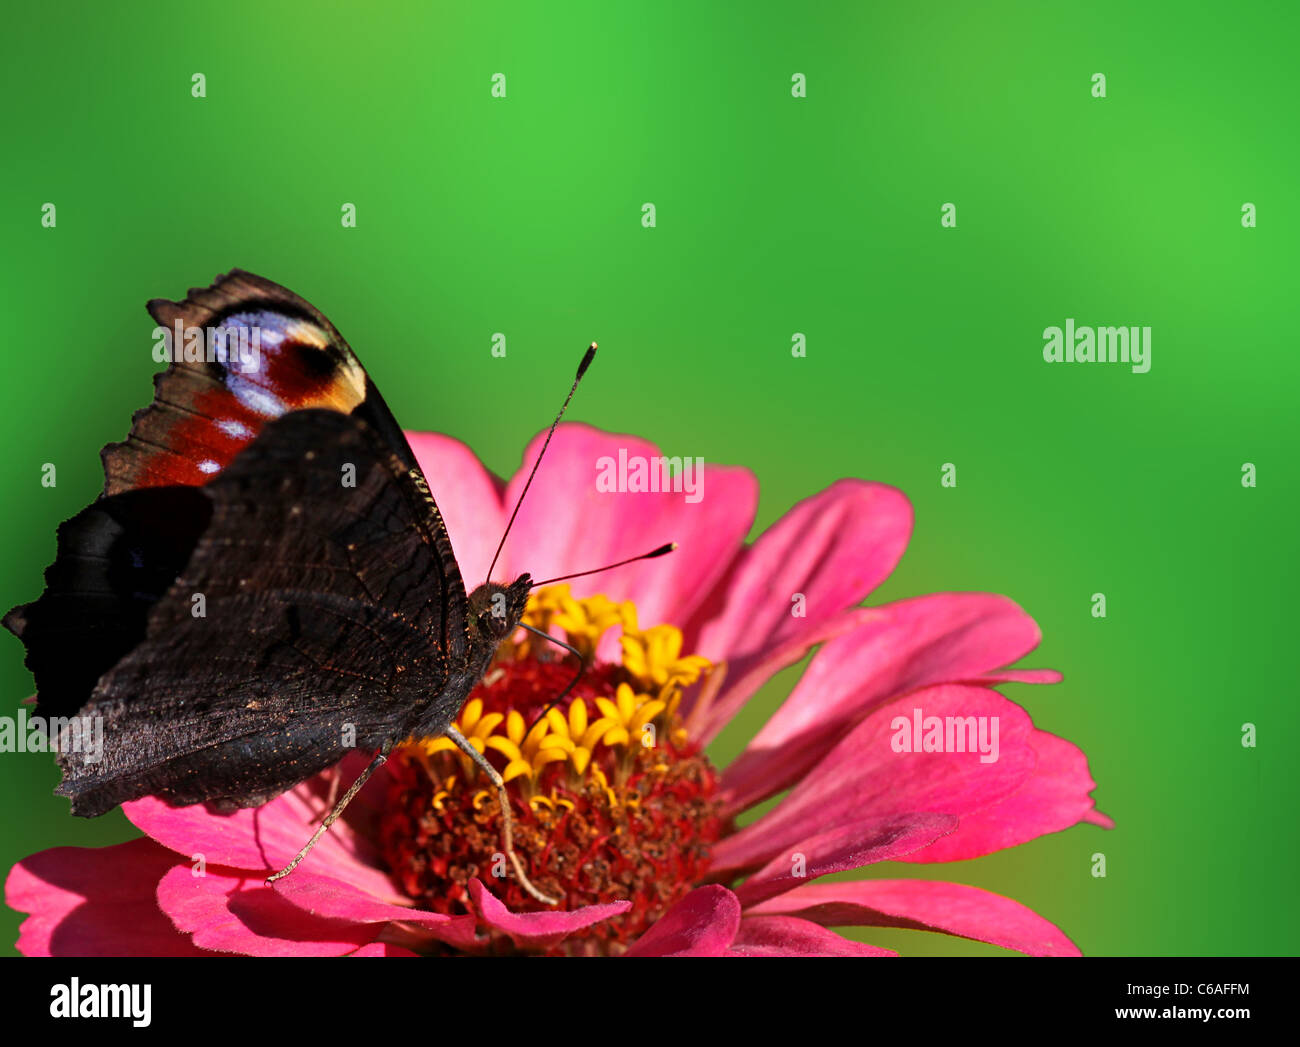 green background with butterfly (european peacock) on flower Stock Photo